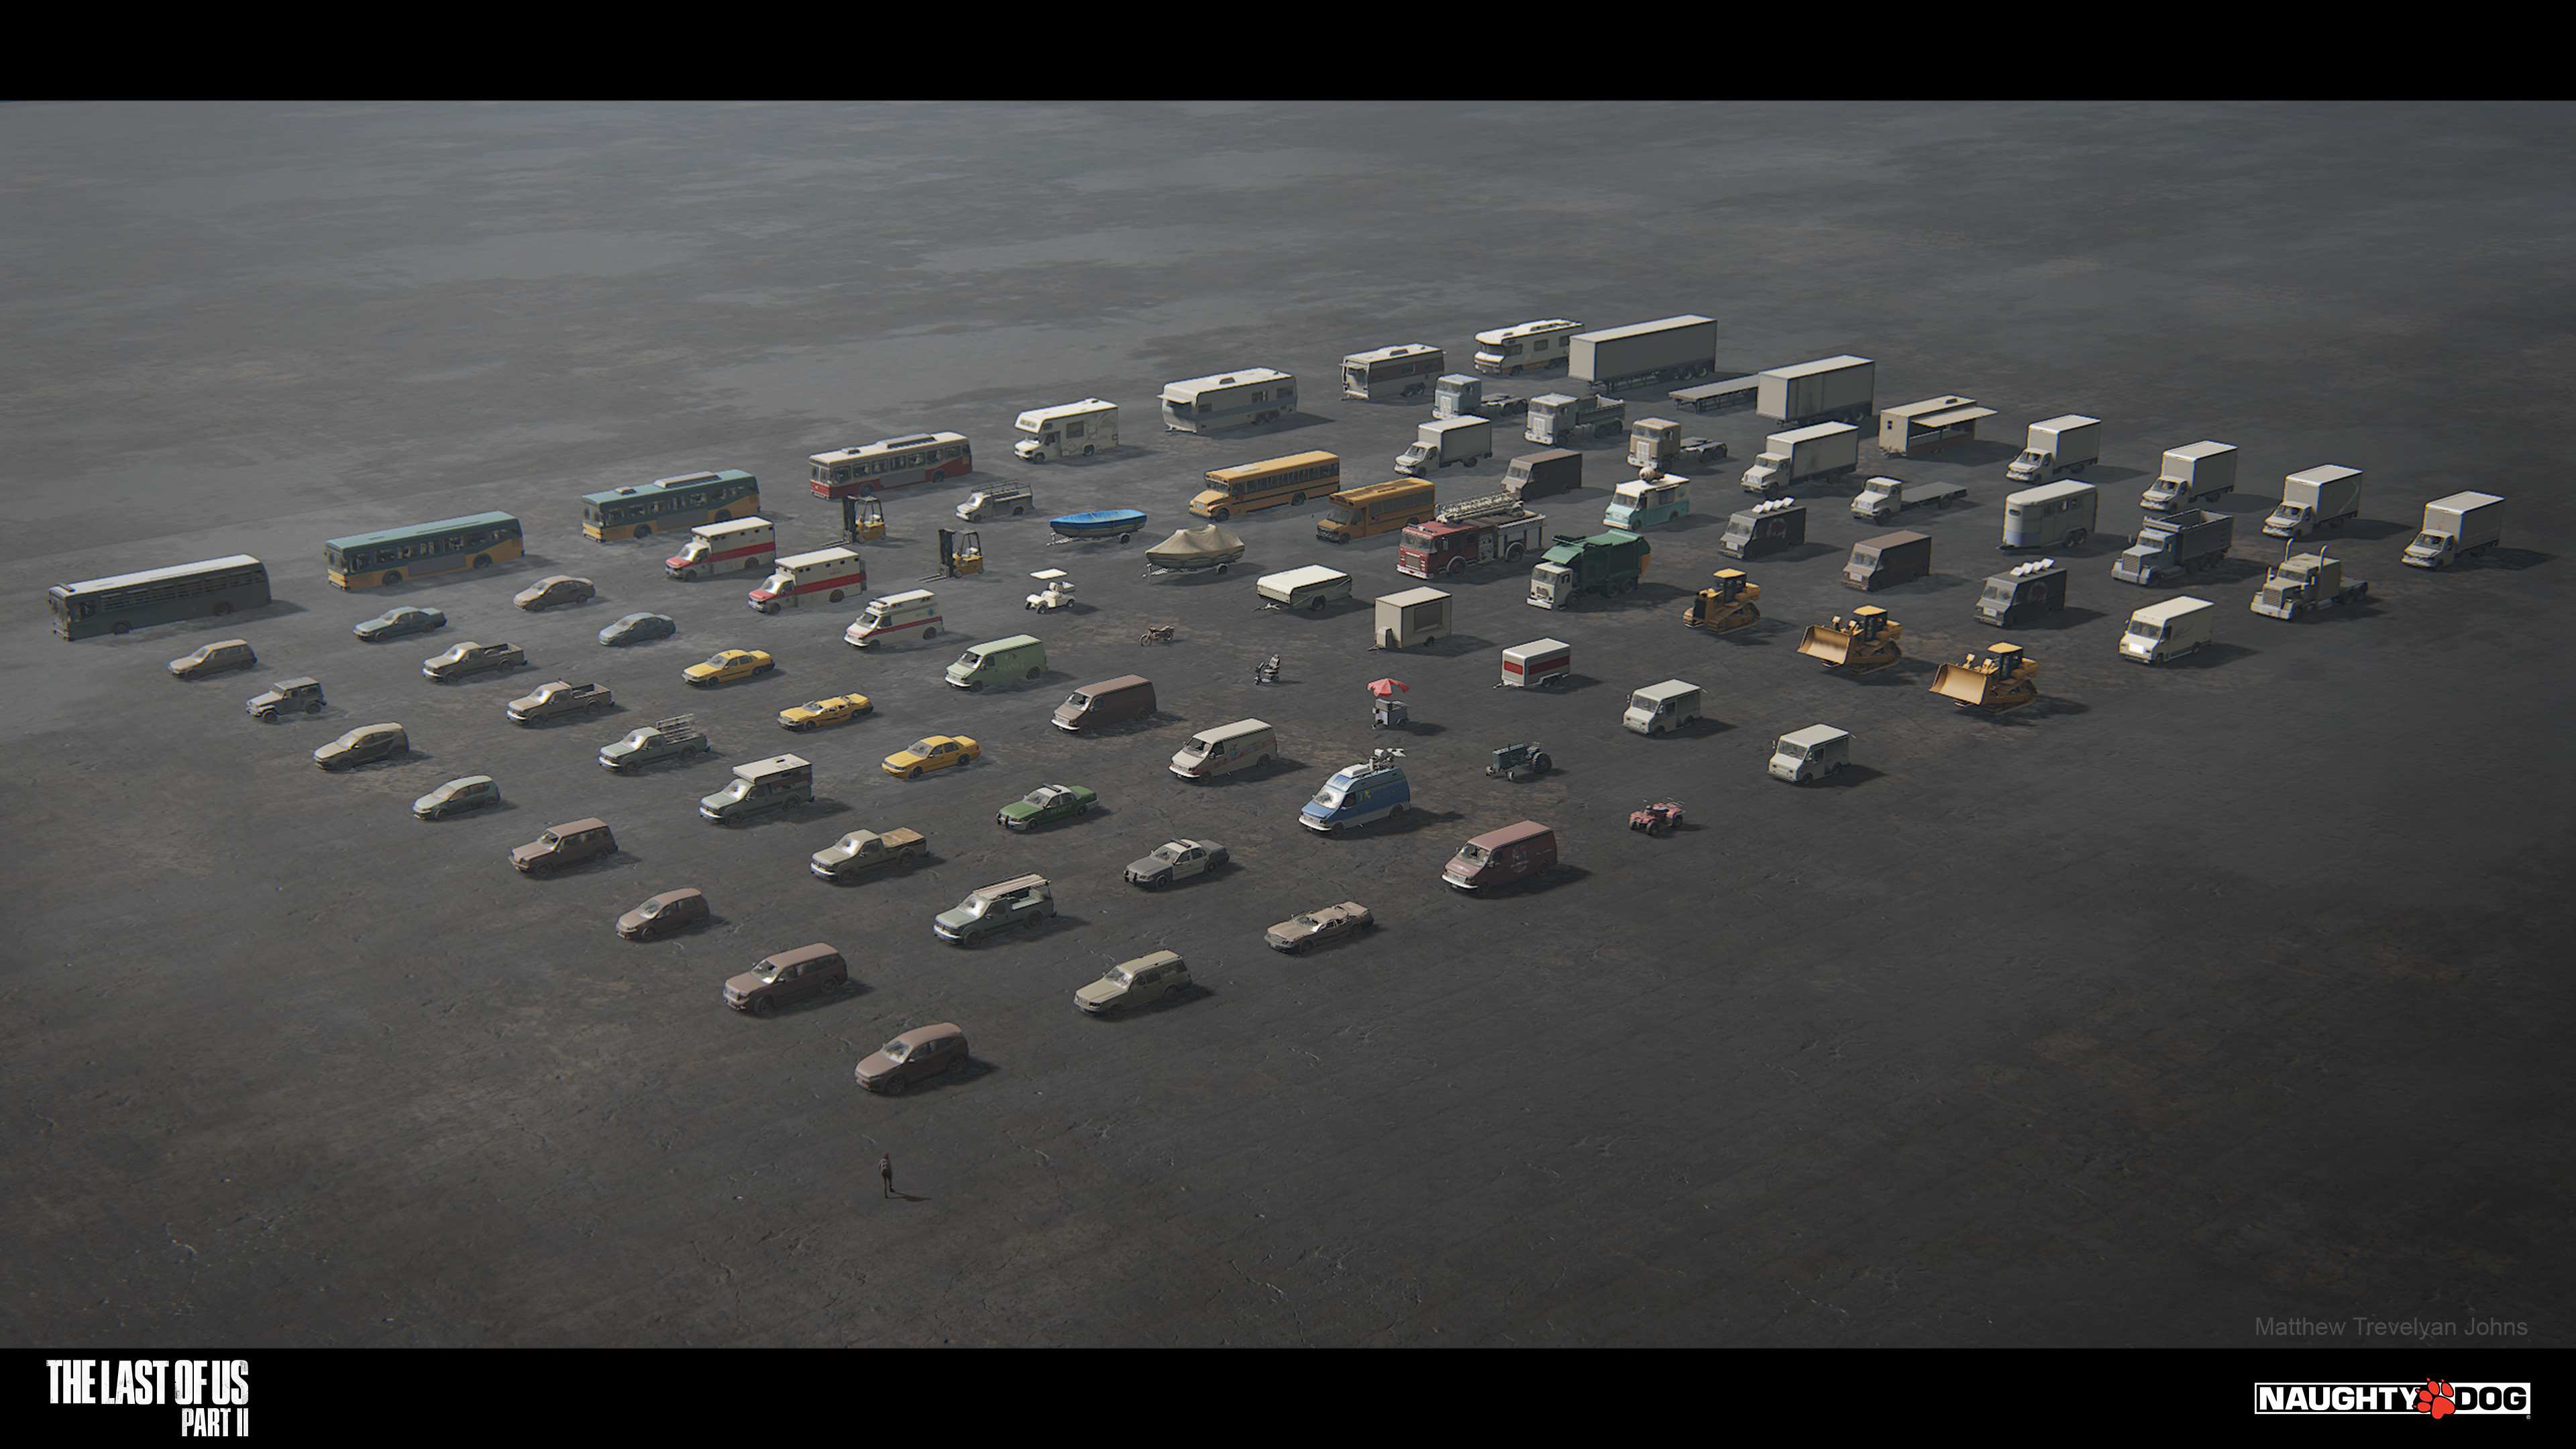 This image shows almost all of the standard vehicle models that featured in the game, most of these would then also receive multiple 'look' shader variations, like snow covered, dusty, mossy etc. Shaders are optimized to reduce in detail at this distance